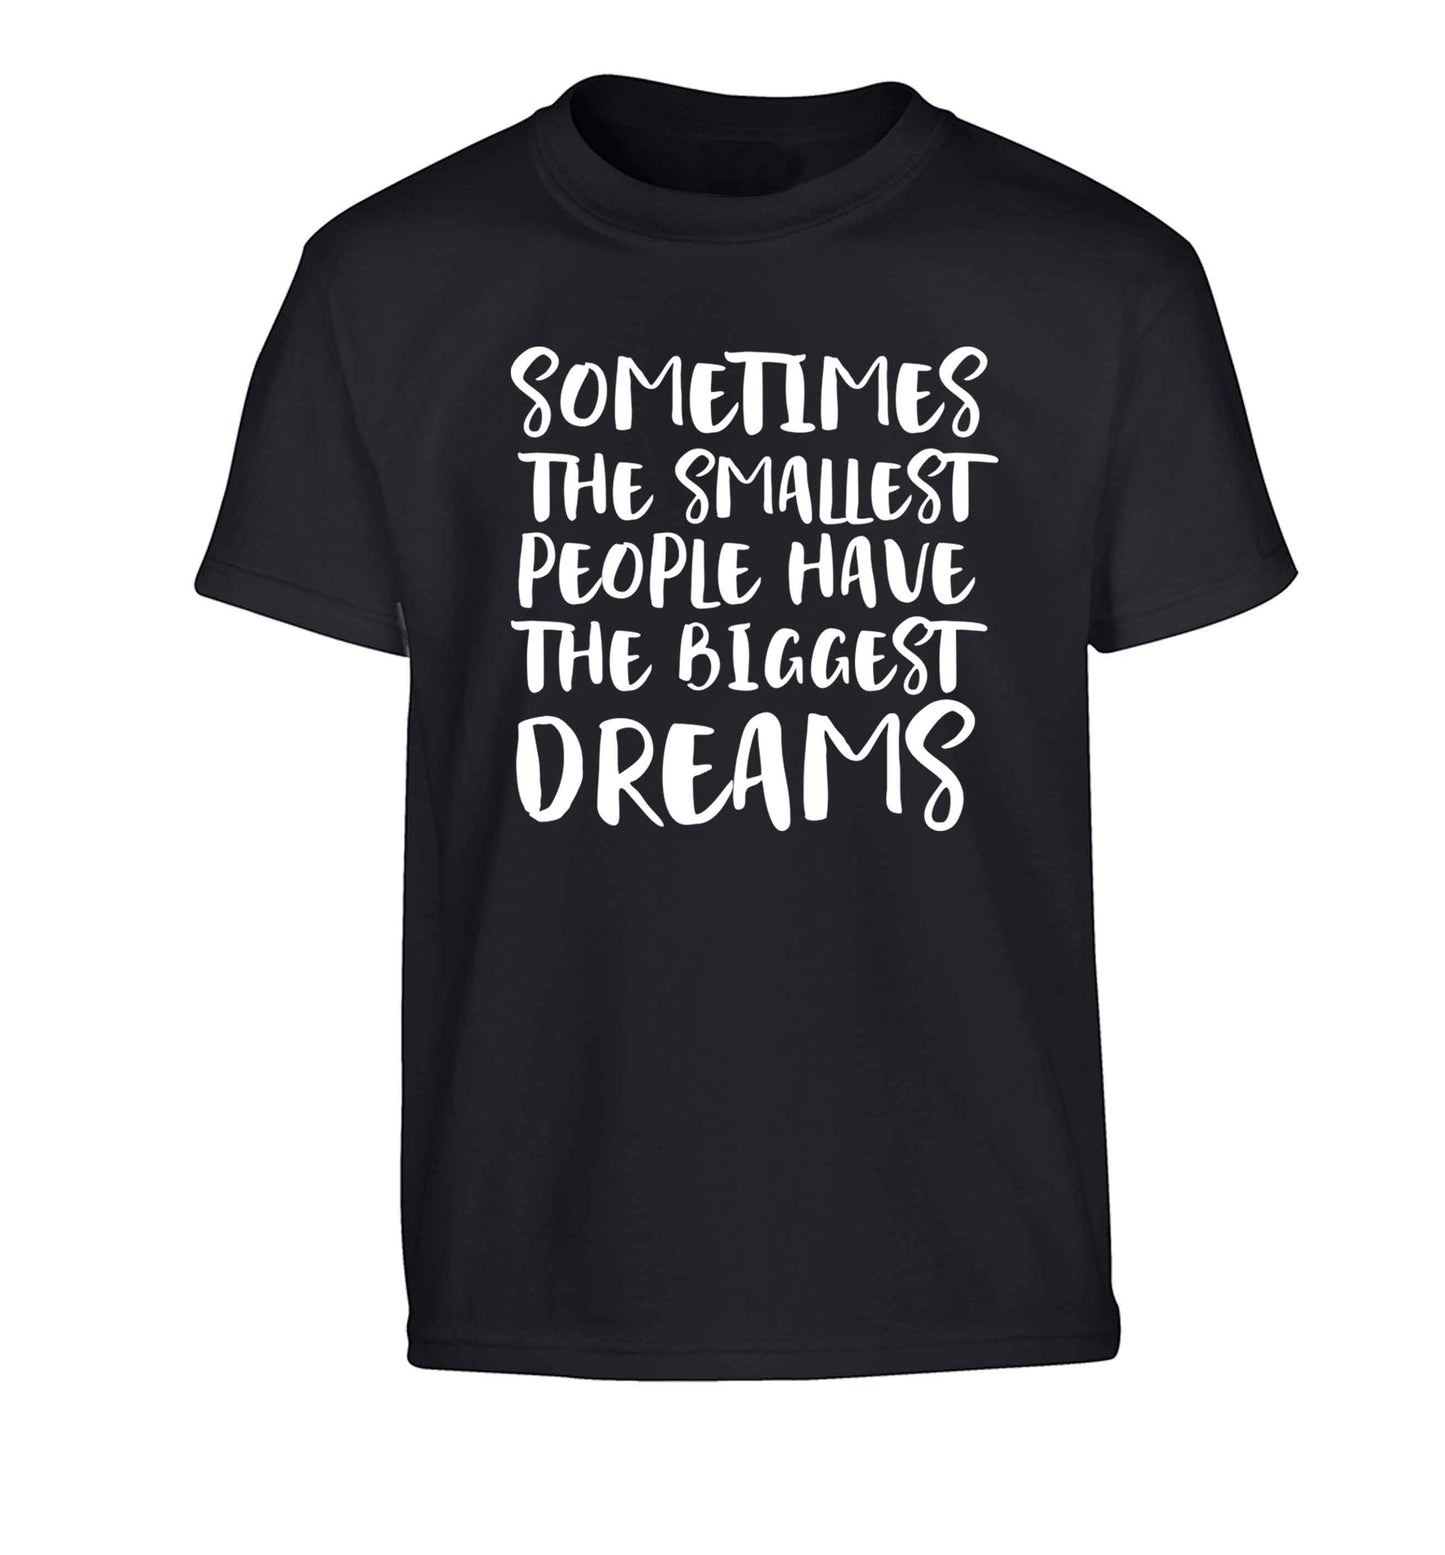 Sometimes the smallest people have the biggest dreams Children's black Tshirt 12-13 Years